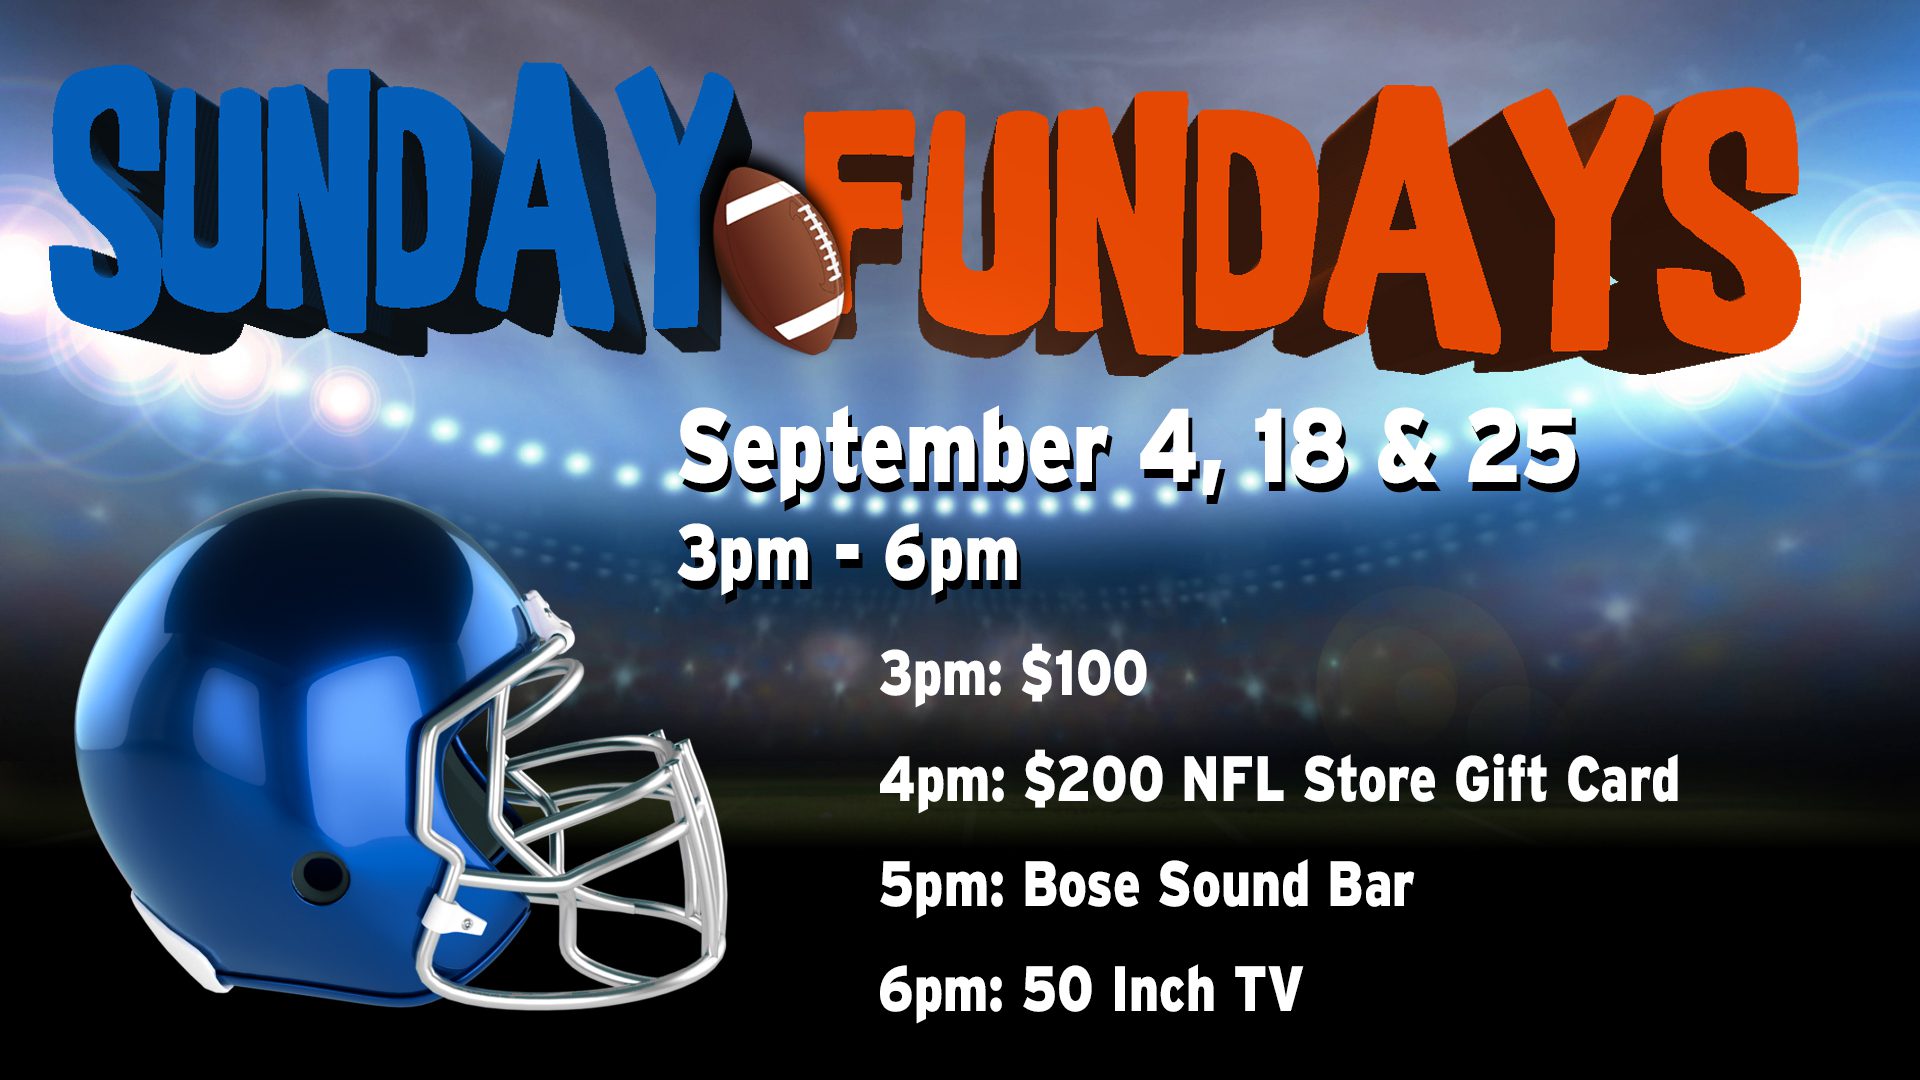 Promotional graphic for "sunday fundays" event featuring football-themed prizes on select september dates.